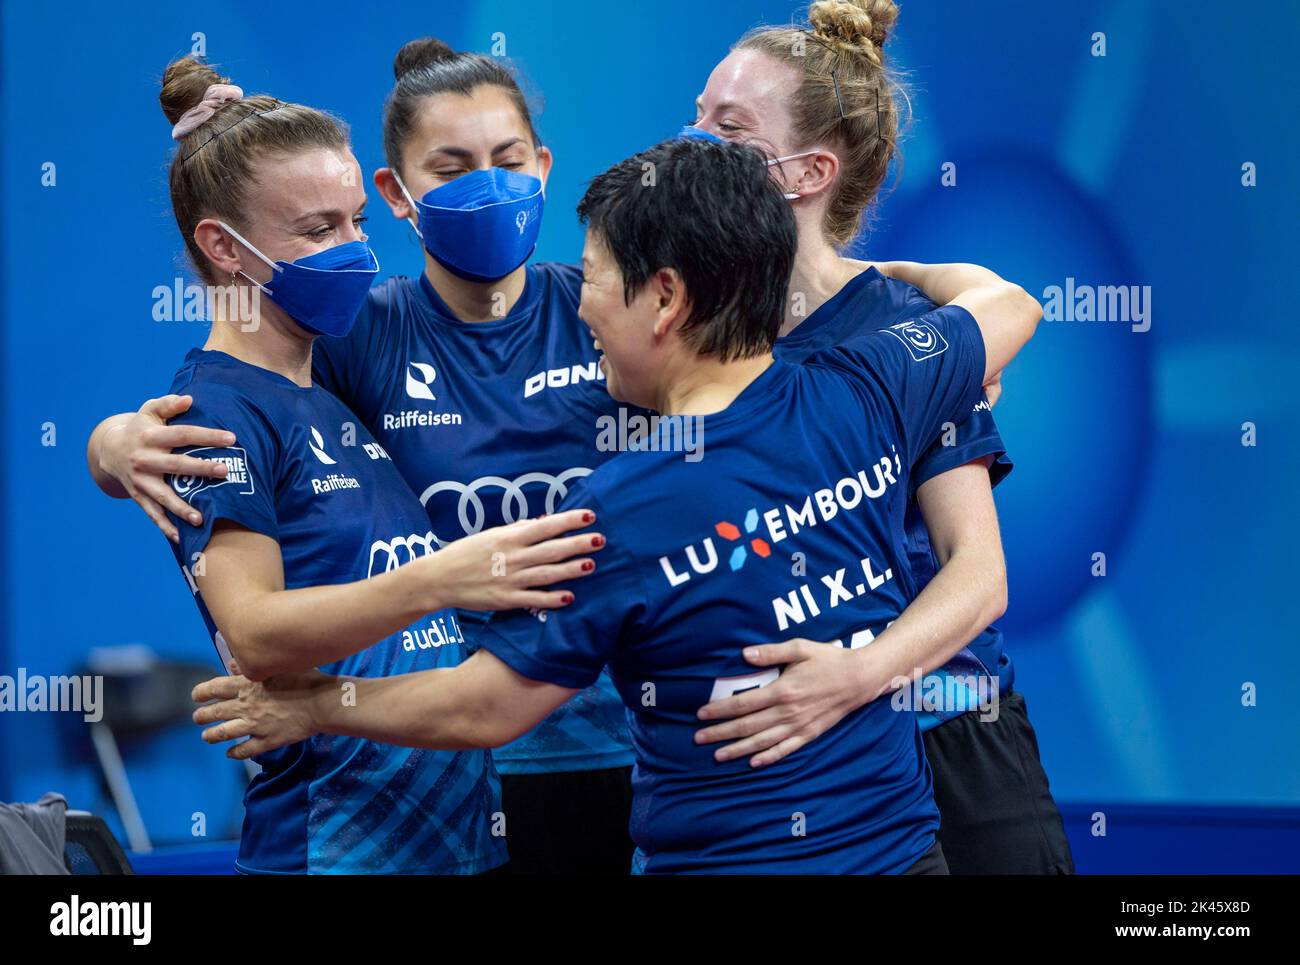 CHENGDU, CHINA - SEPTEMBER 30, 2022 - Ni Xia Lian of Luxembourg Celebrate with her teammates during 2022 ITTF World Team Championships Finals  at High Stock Photo